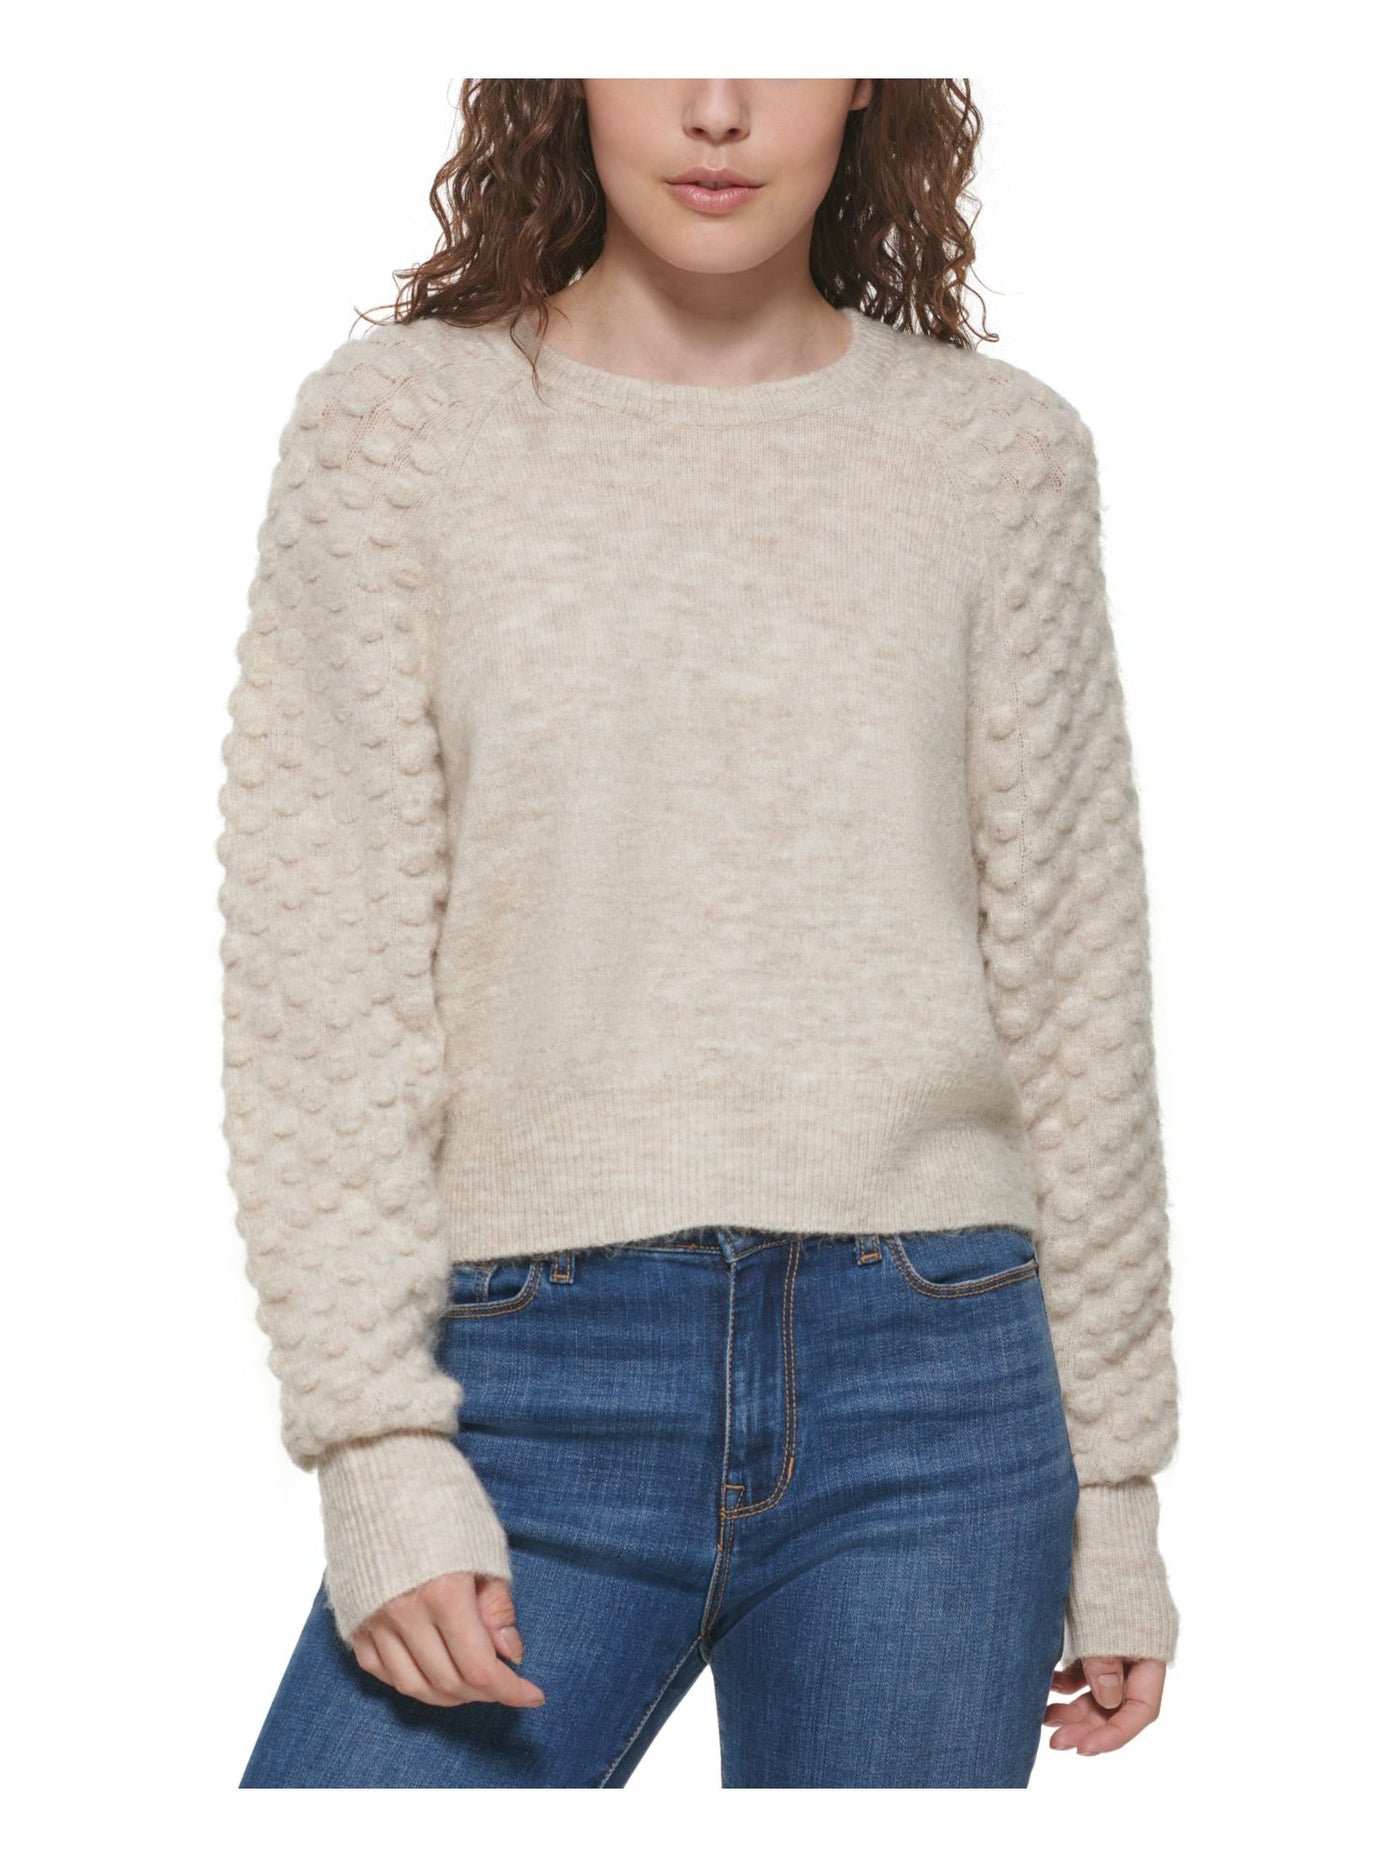 DKNY Womens Beige Textured Ribbed Logo Hardware Pullover Heather Long Sleeve Round Neck Sweater L